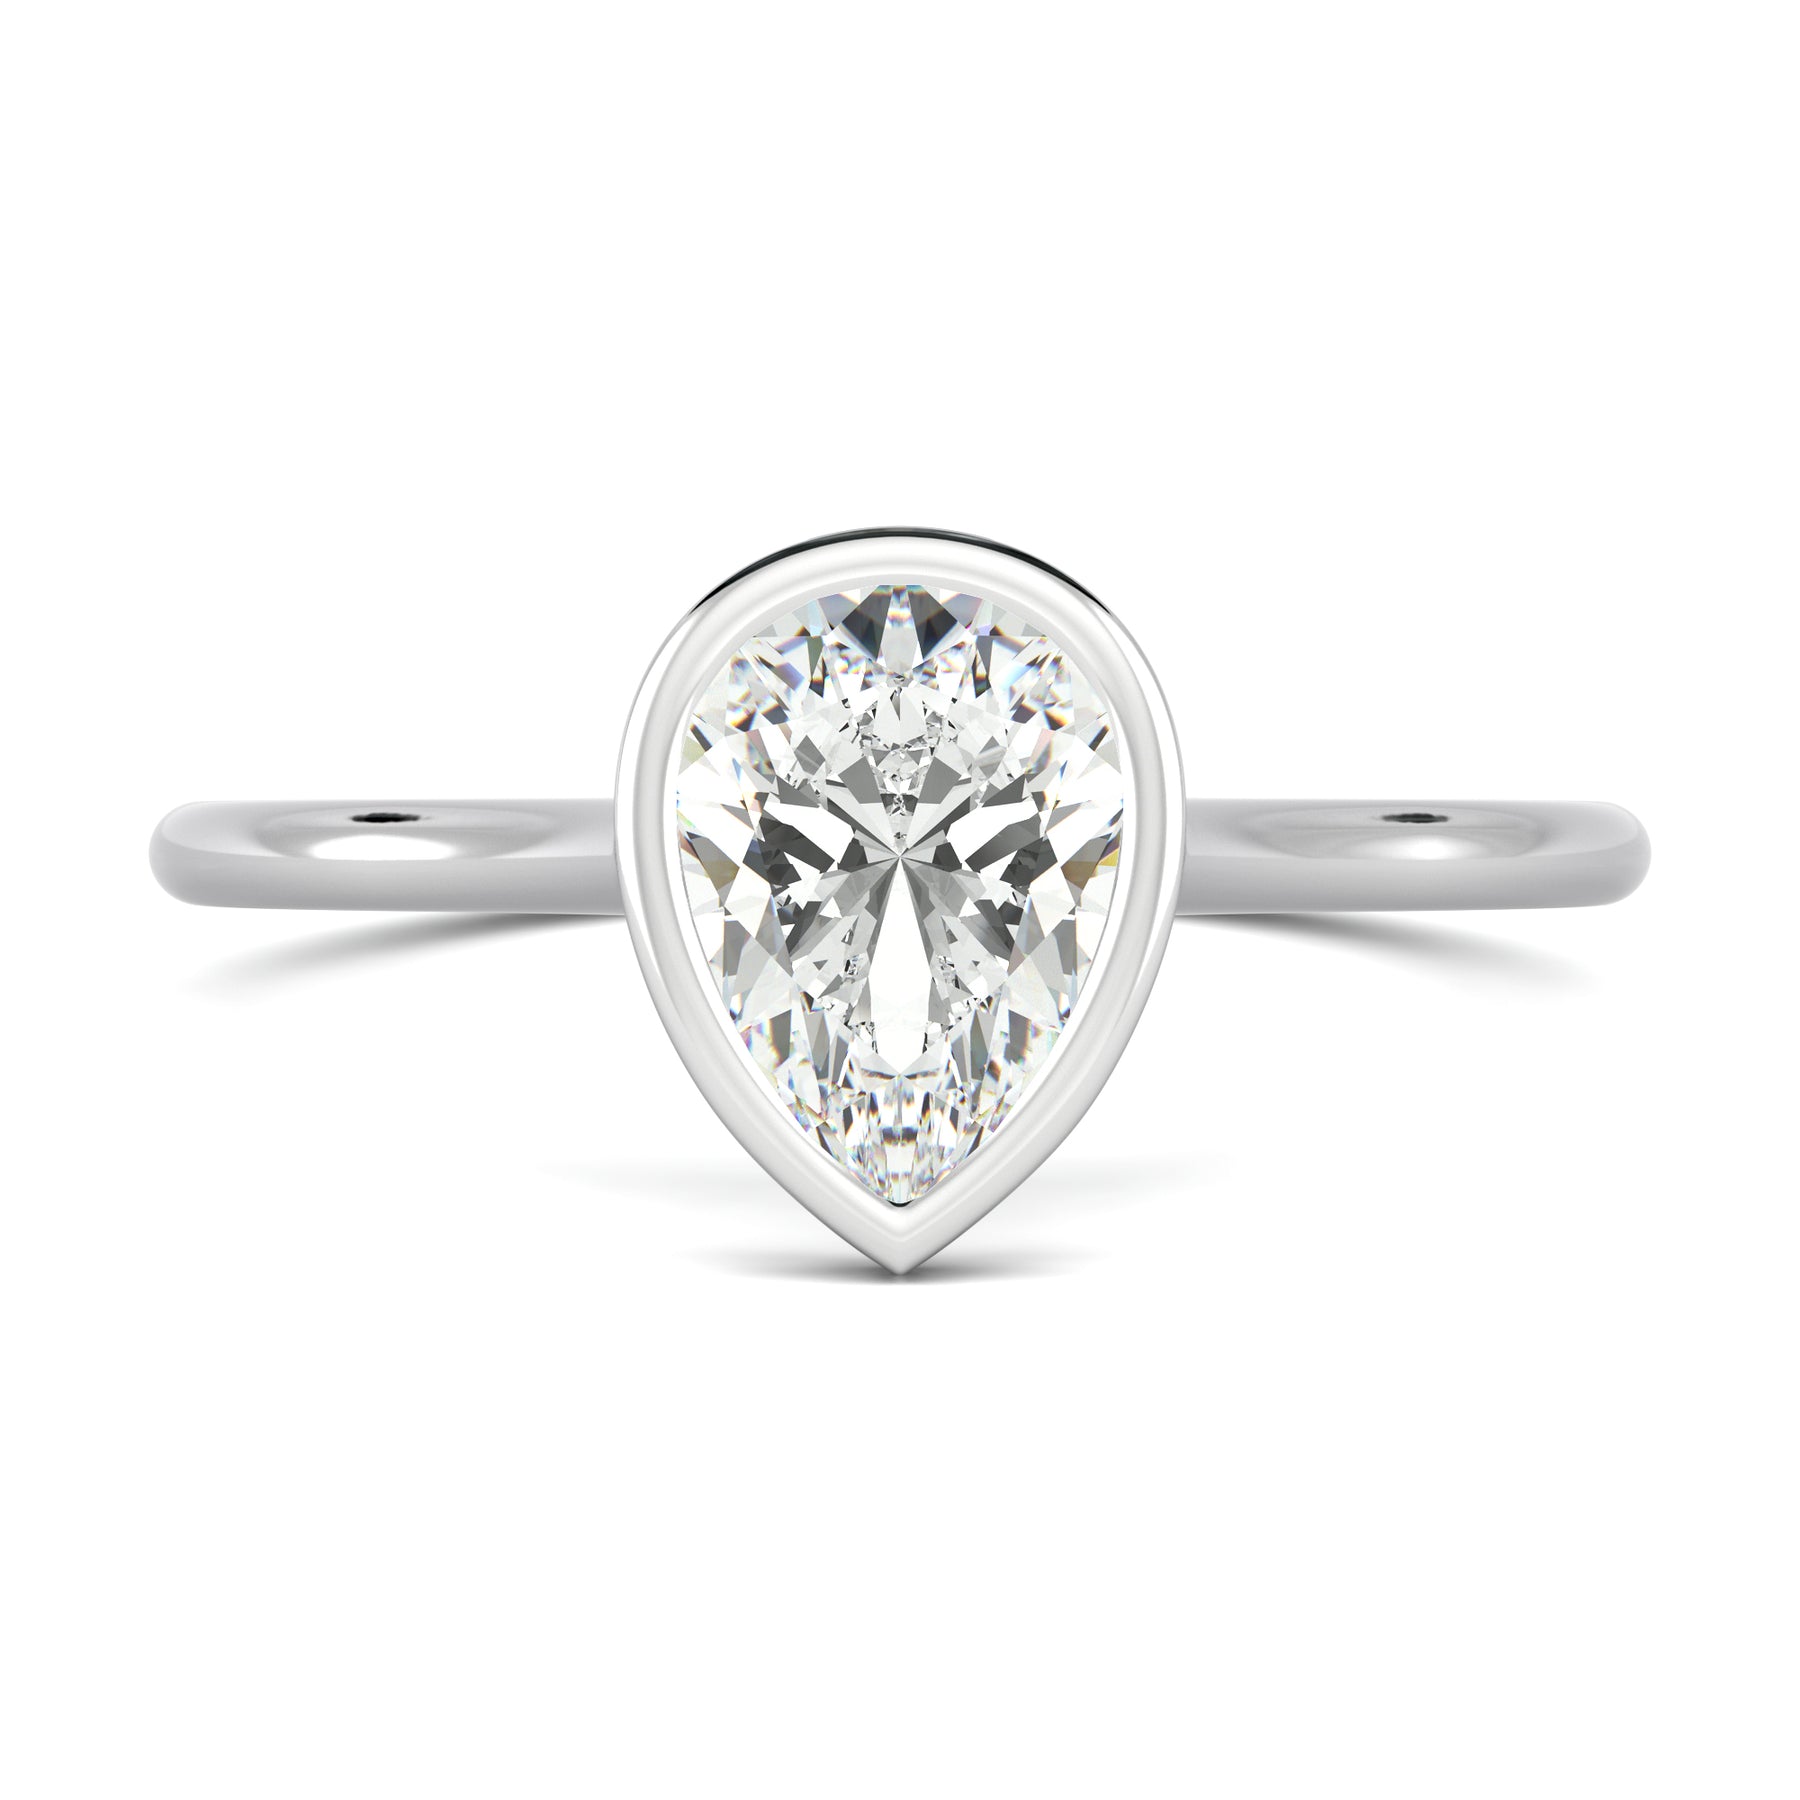 Solitaire pear-shaped diamond engagement ring in bezel setting - Juno ...